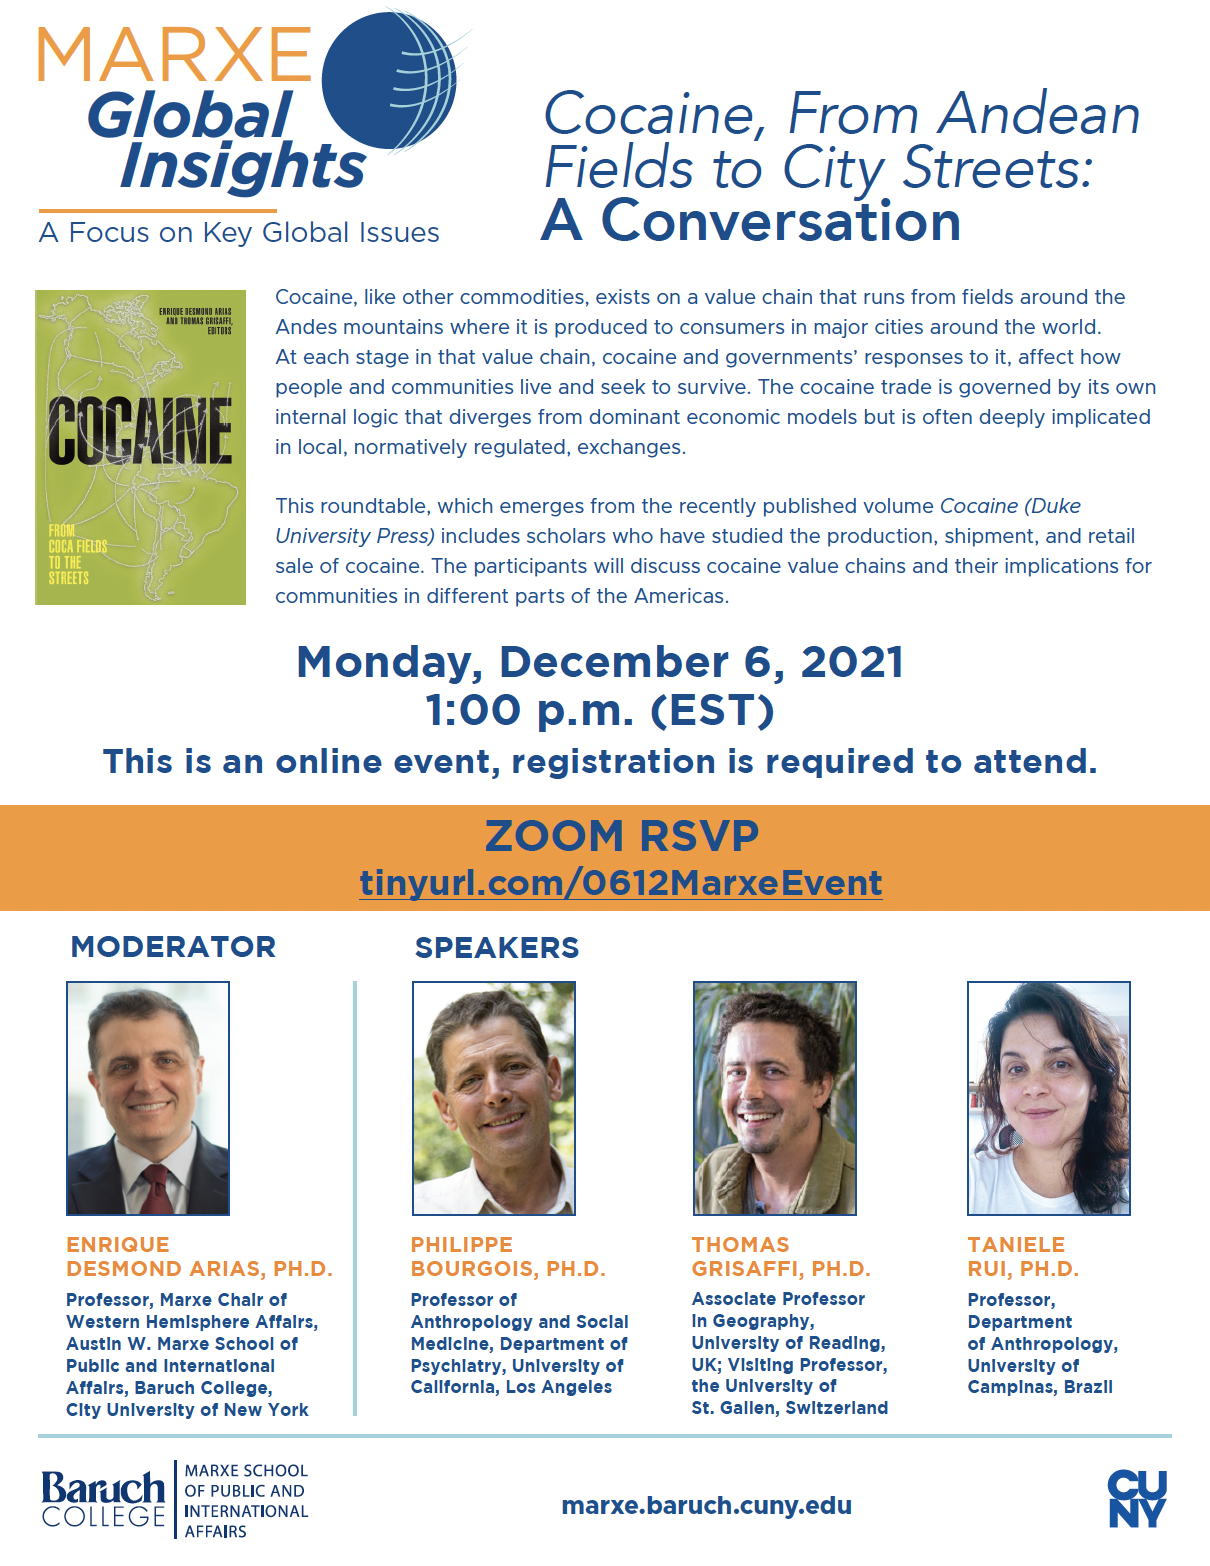 Webinar: Marxe Global Insights Cocaine, From Andean Fields to City Streets: A Conversation